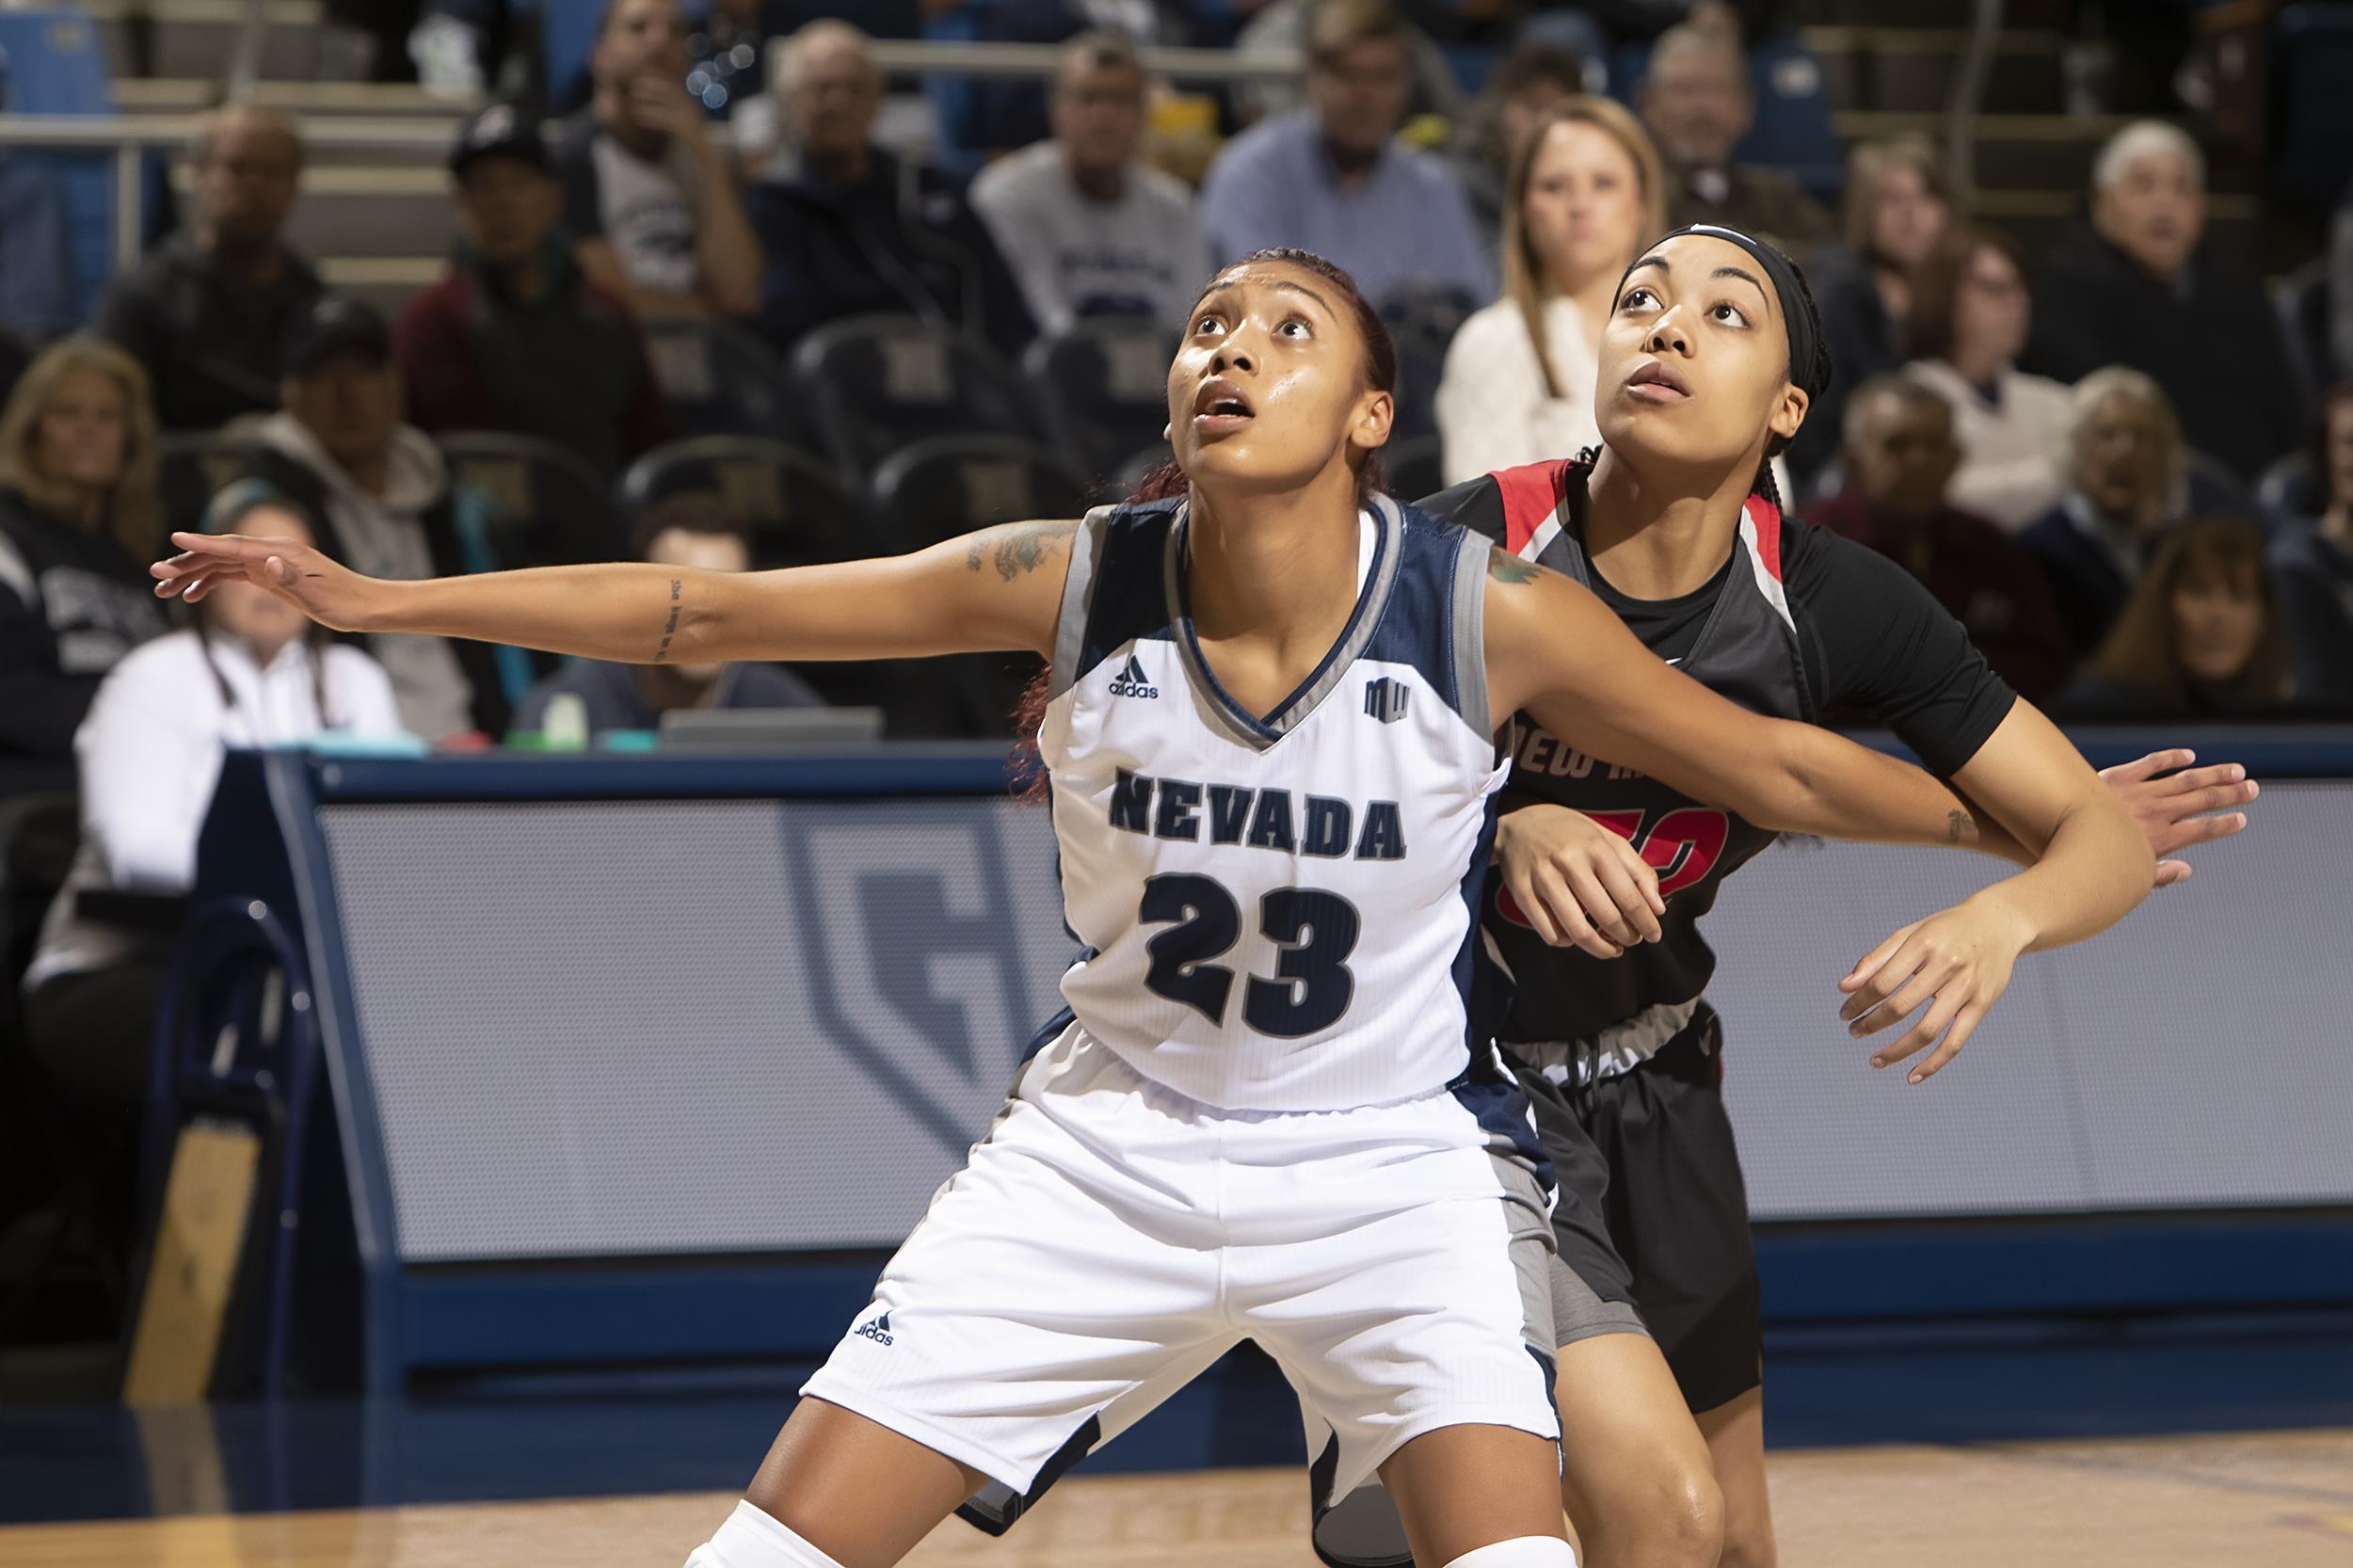 Nevada Senior Terae Briggs (Crow Tribe) recorded her eighth double-double of the season